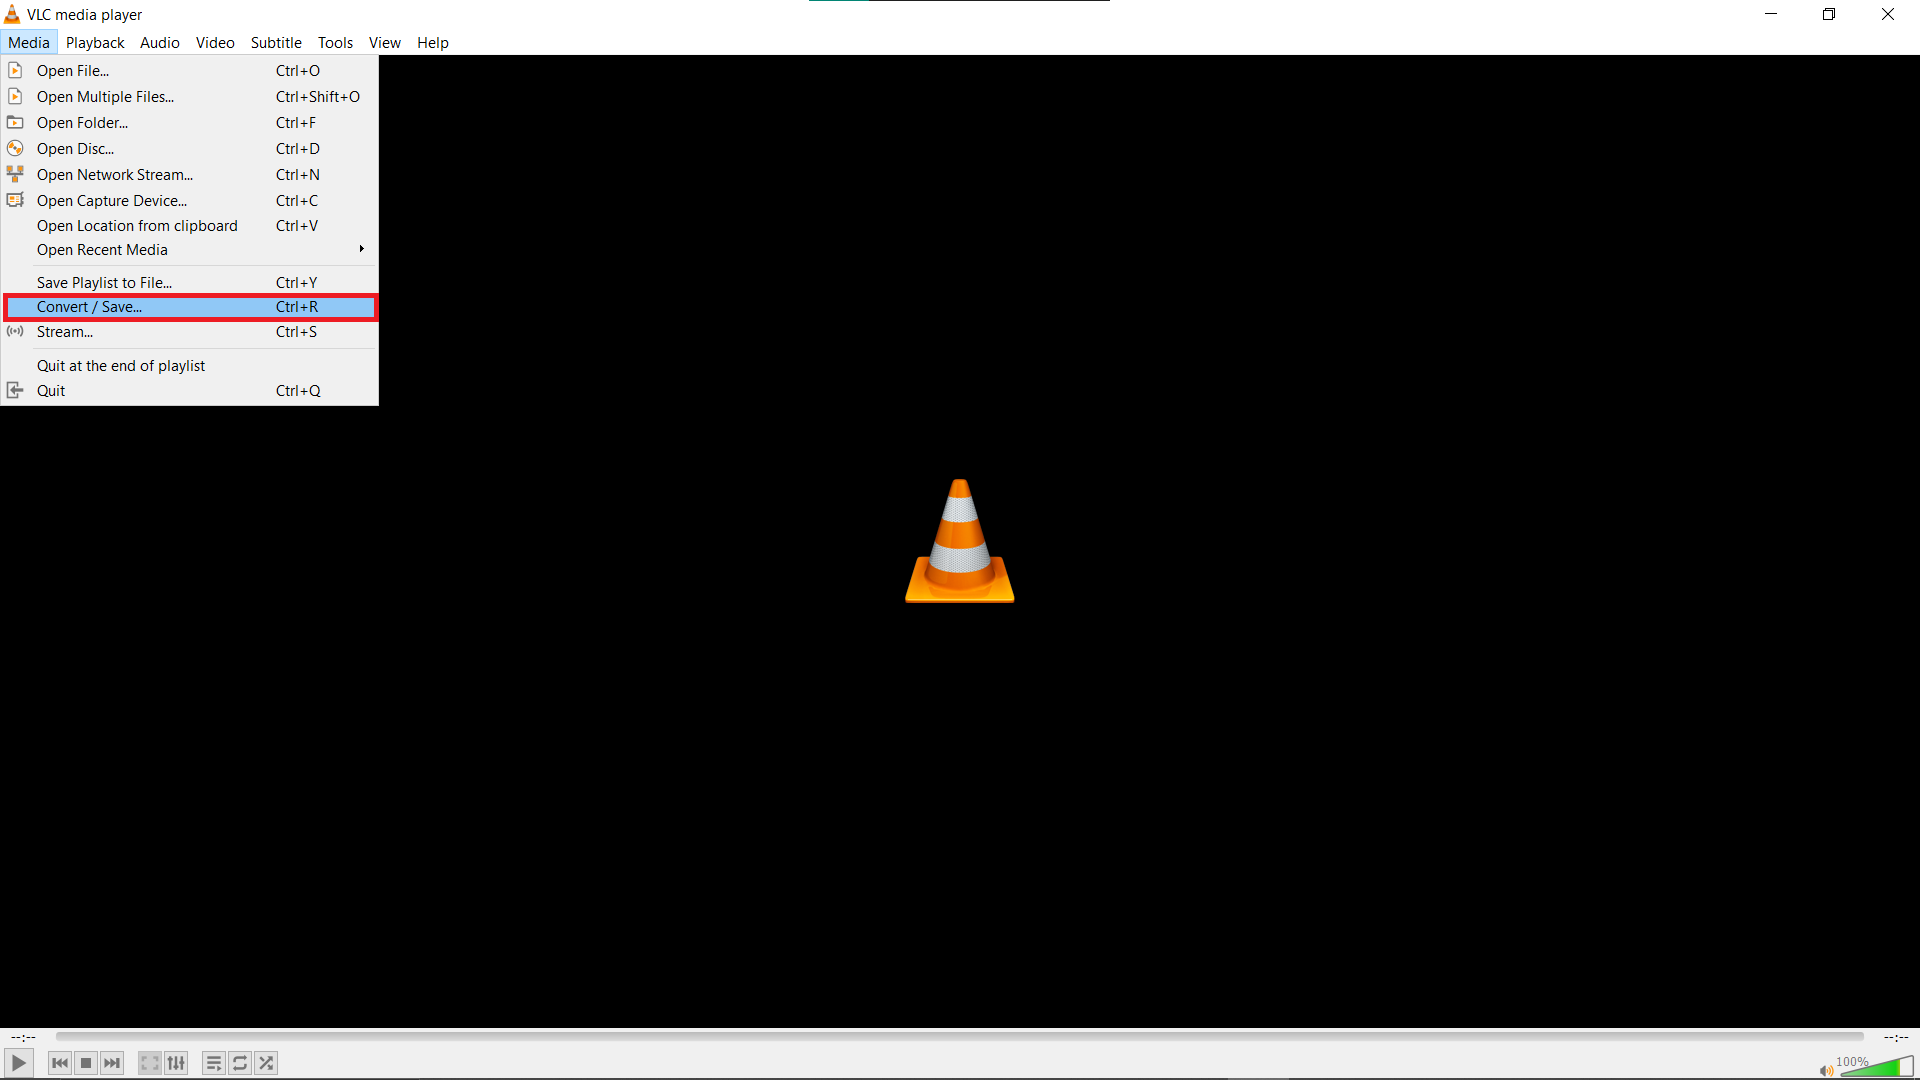 How To Use VLC for Compression: Step 2